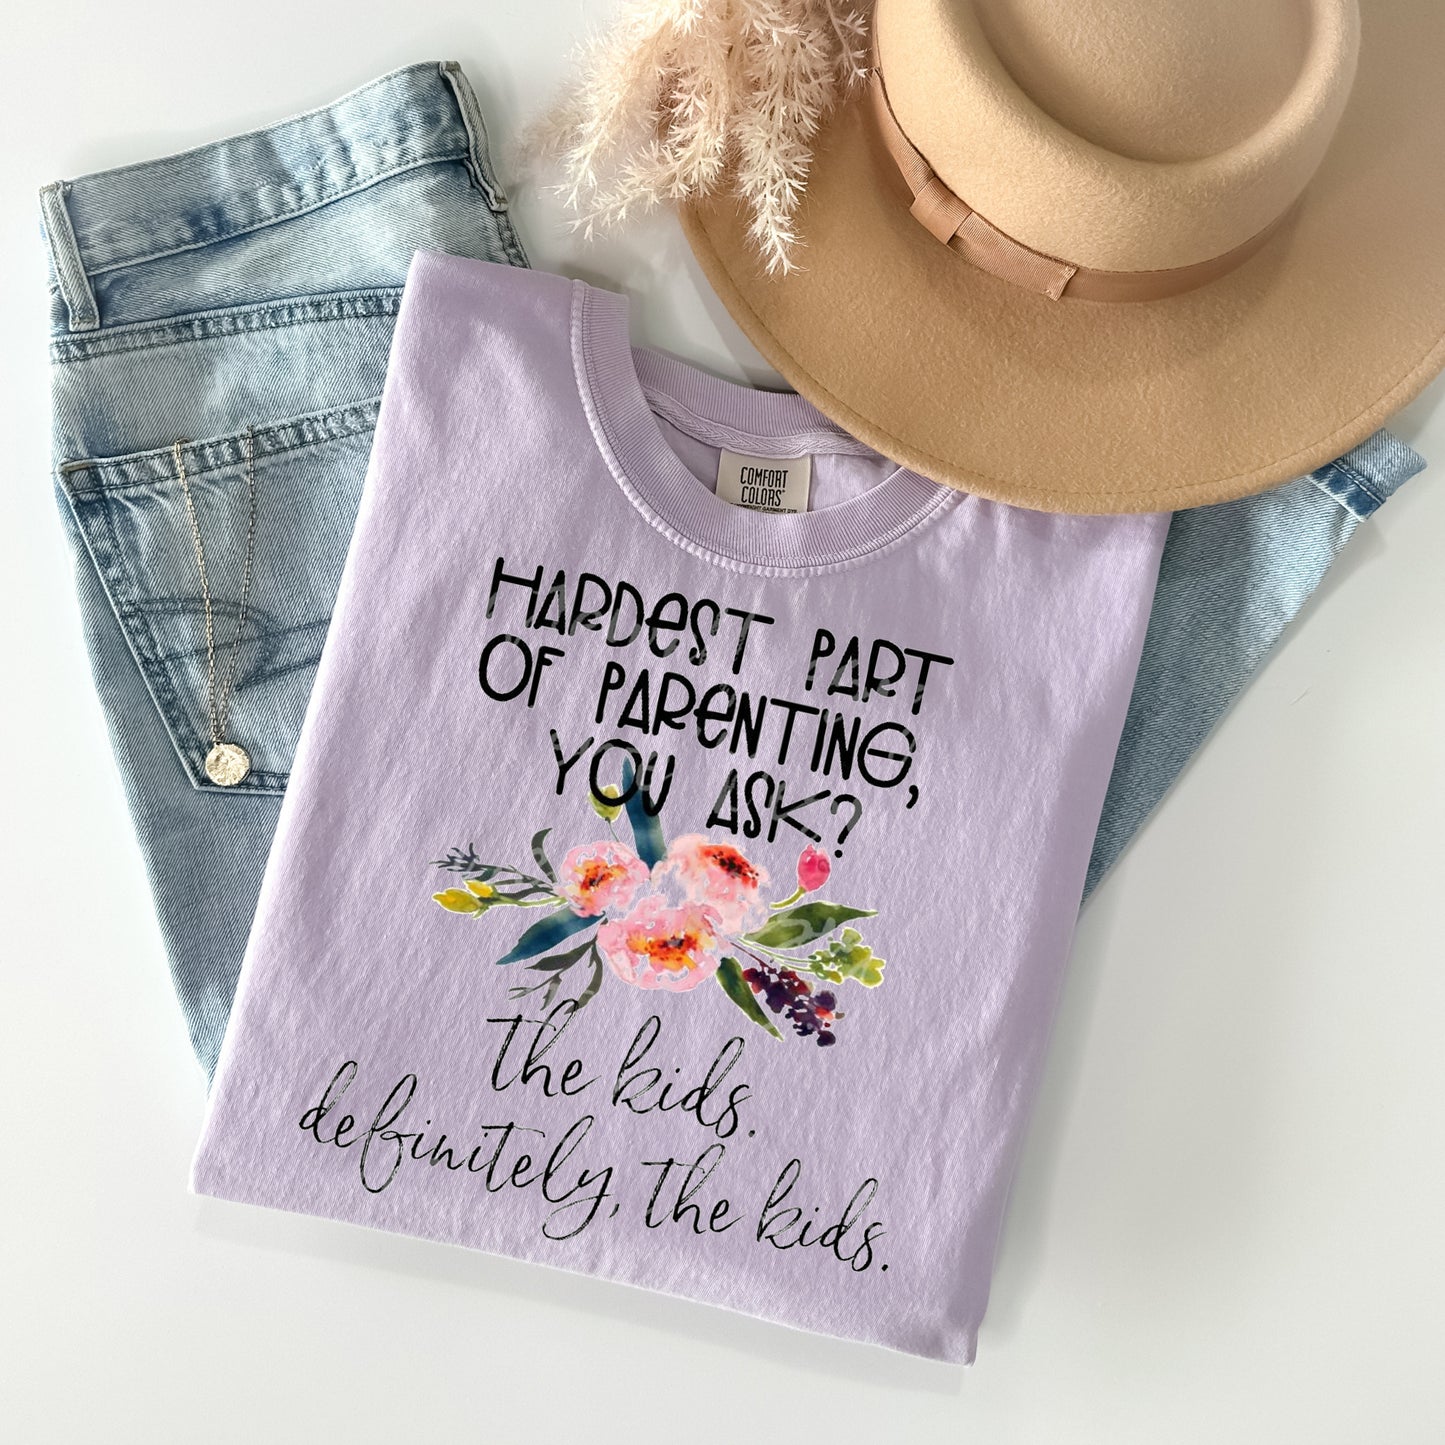 Hardest Part of Parenting You Ask Graphic Tee